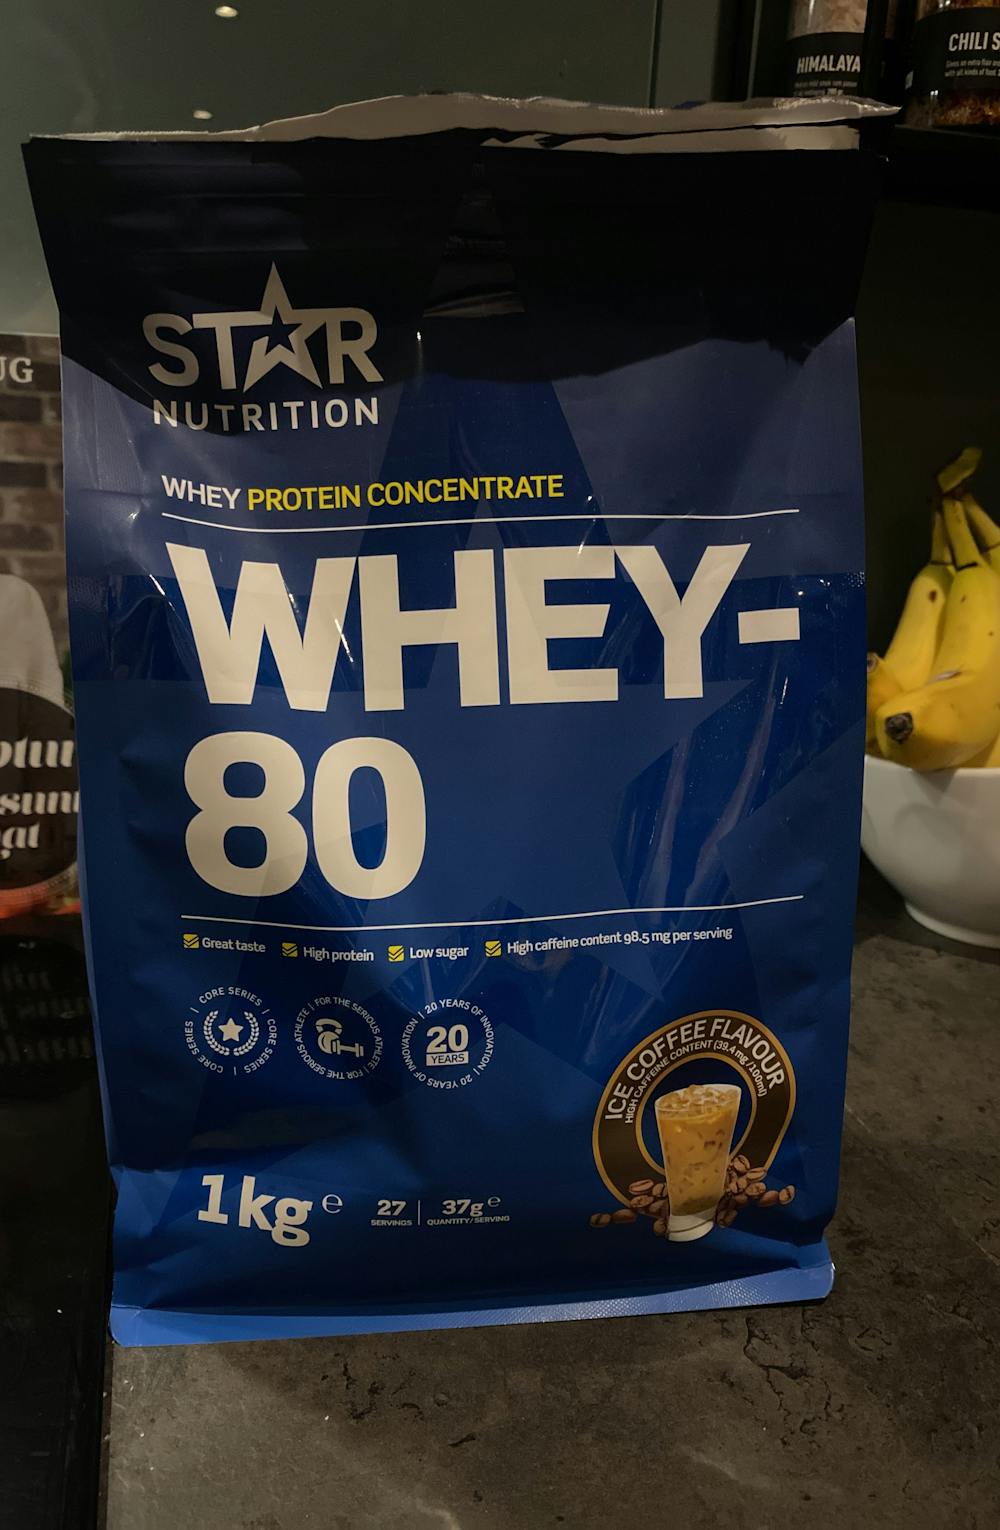 Whey-80, ice coffee flavour, Star Nutrition